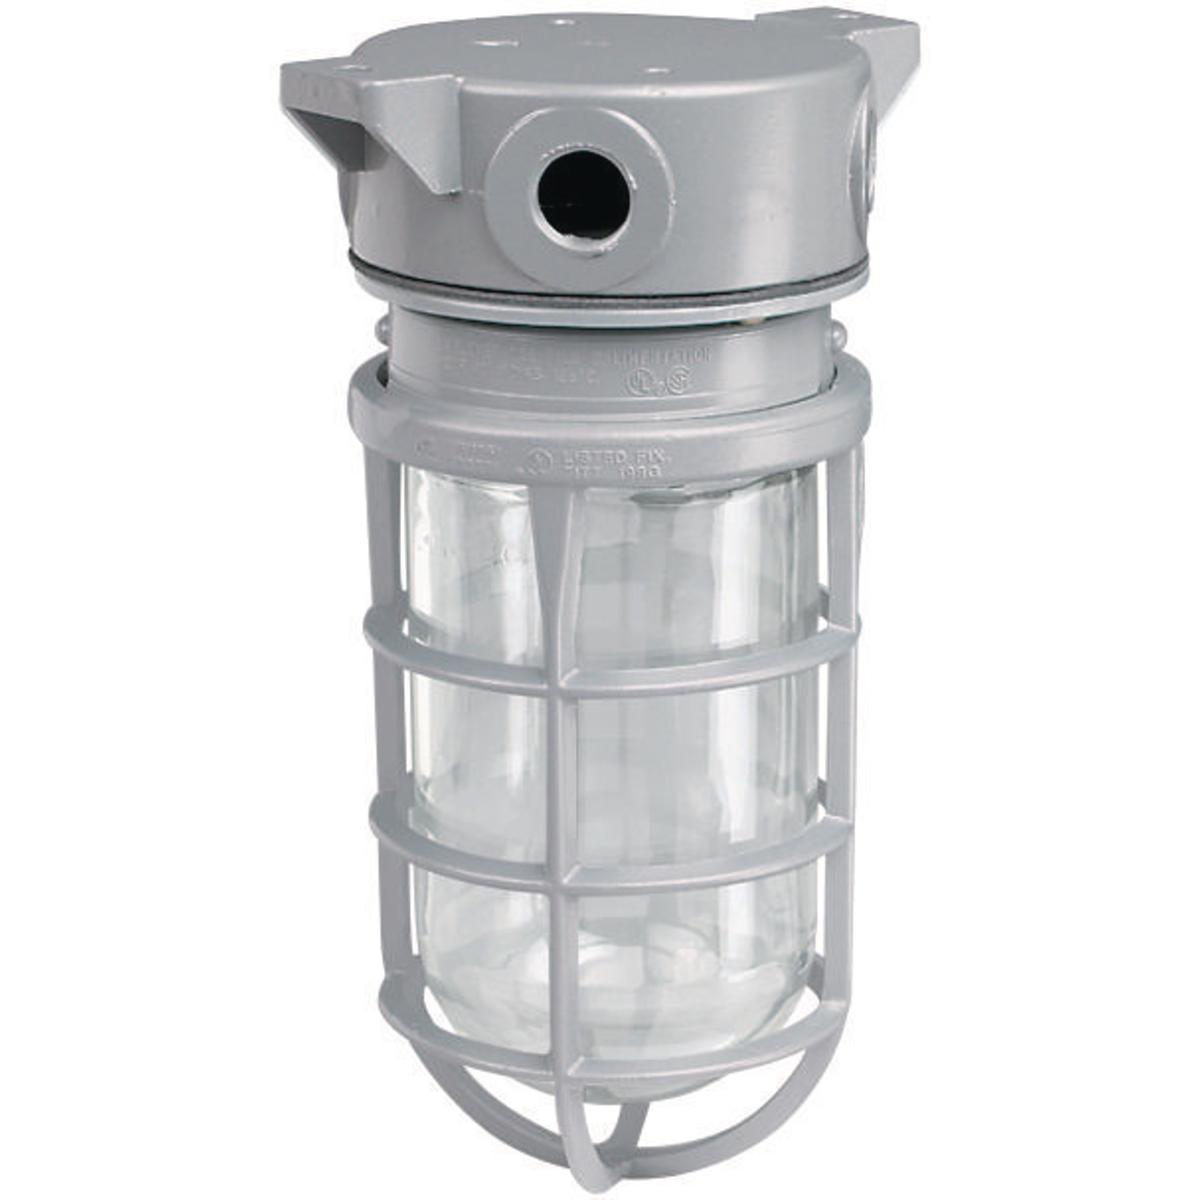 Hubbell VUXBGG-1-200 SU104 200W V Series Incandescent - Ceiling Fixture With Mounting Feet Using VBC Splice Box & VBA Adapter - 1/2" Hub with Guard - Unit Pack  ; Electrostatically applied epoxy/polyester finish ; Modular design ; Hubs are threaded for attachment to conduit ; Set s